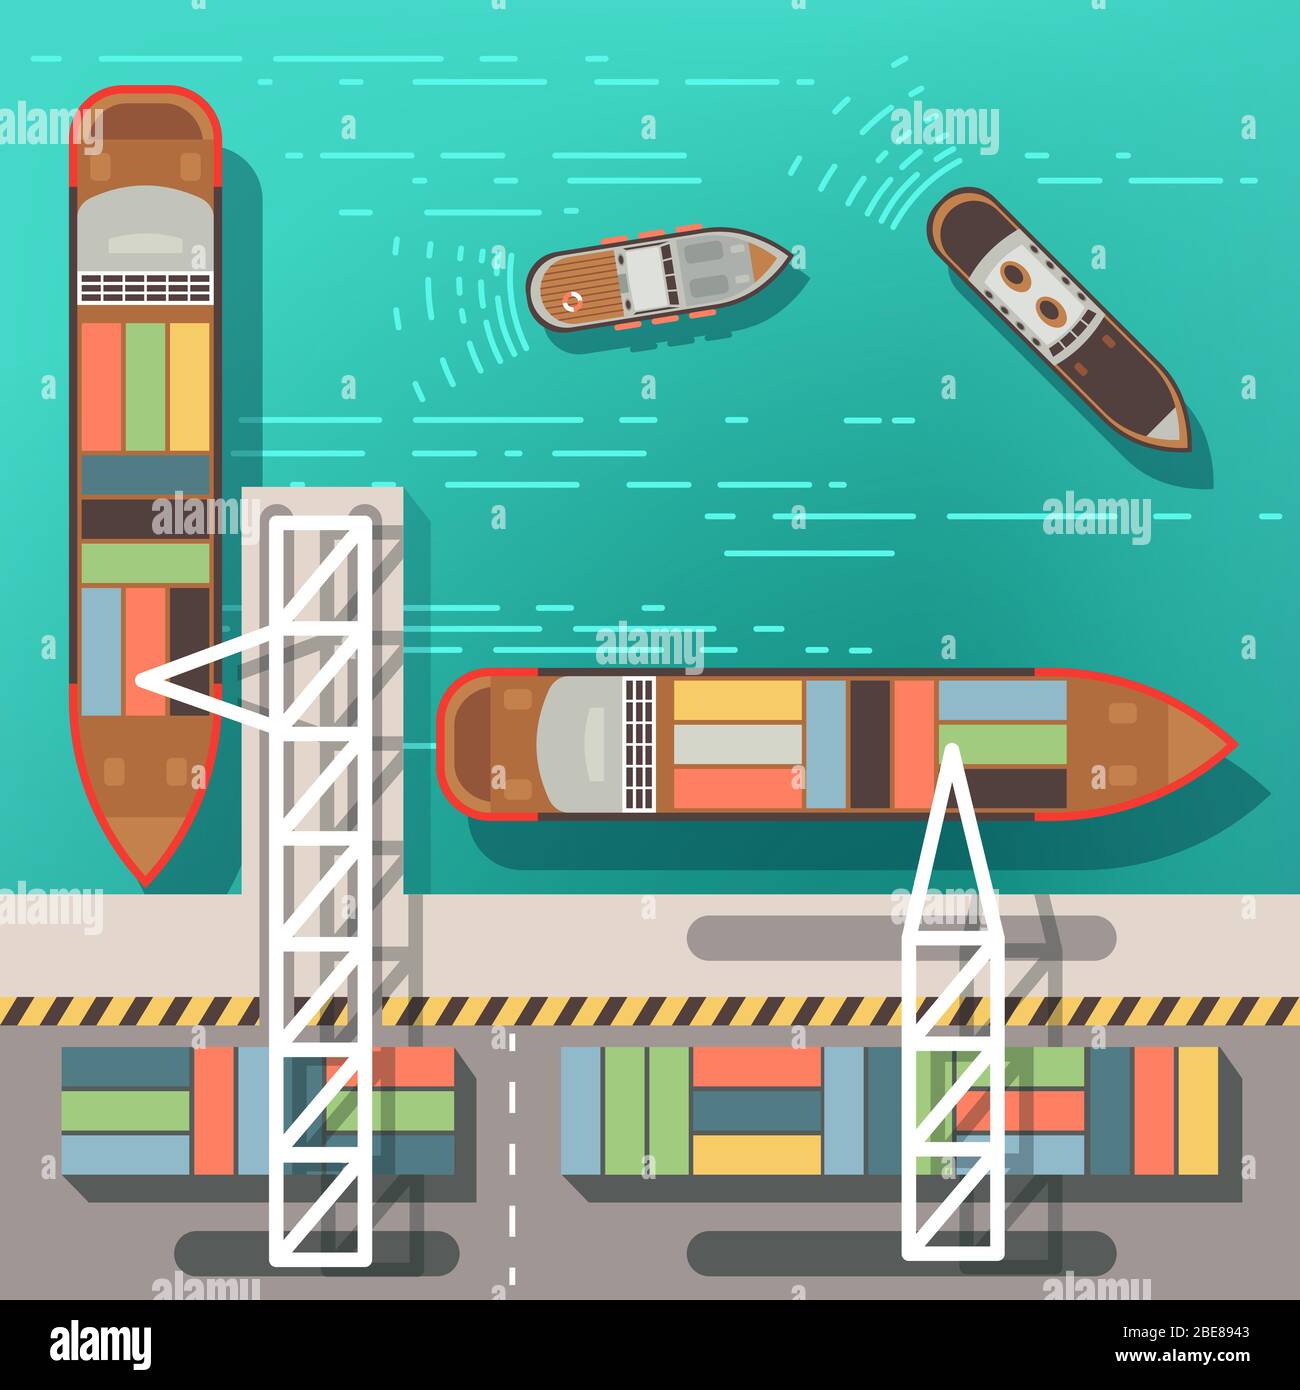 Sea dock or cargo seaport with floating ships and boats. Top view vector illustration. Sea ship and cargo transportation in port Stock Vector